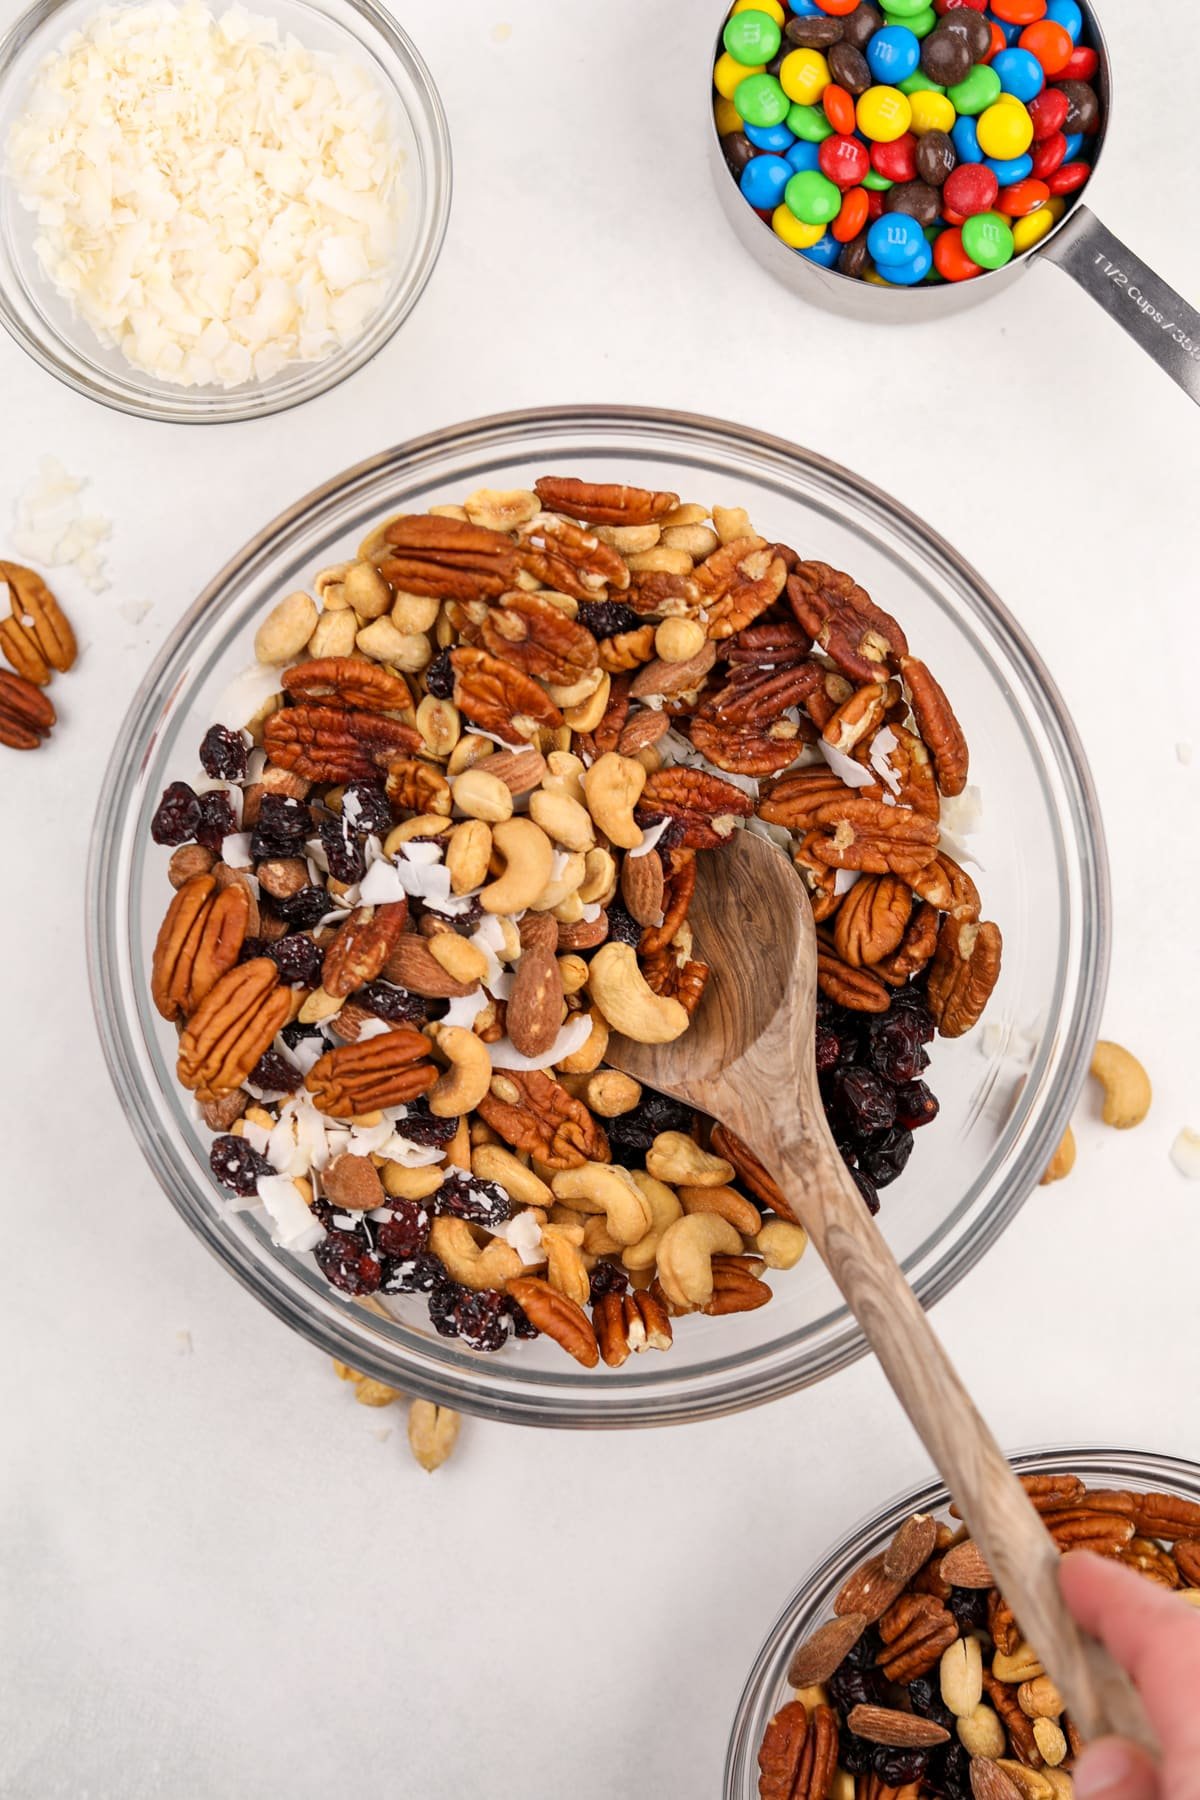 A large bowl filled with mixed nuts, dried fruit, and coconut.